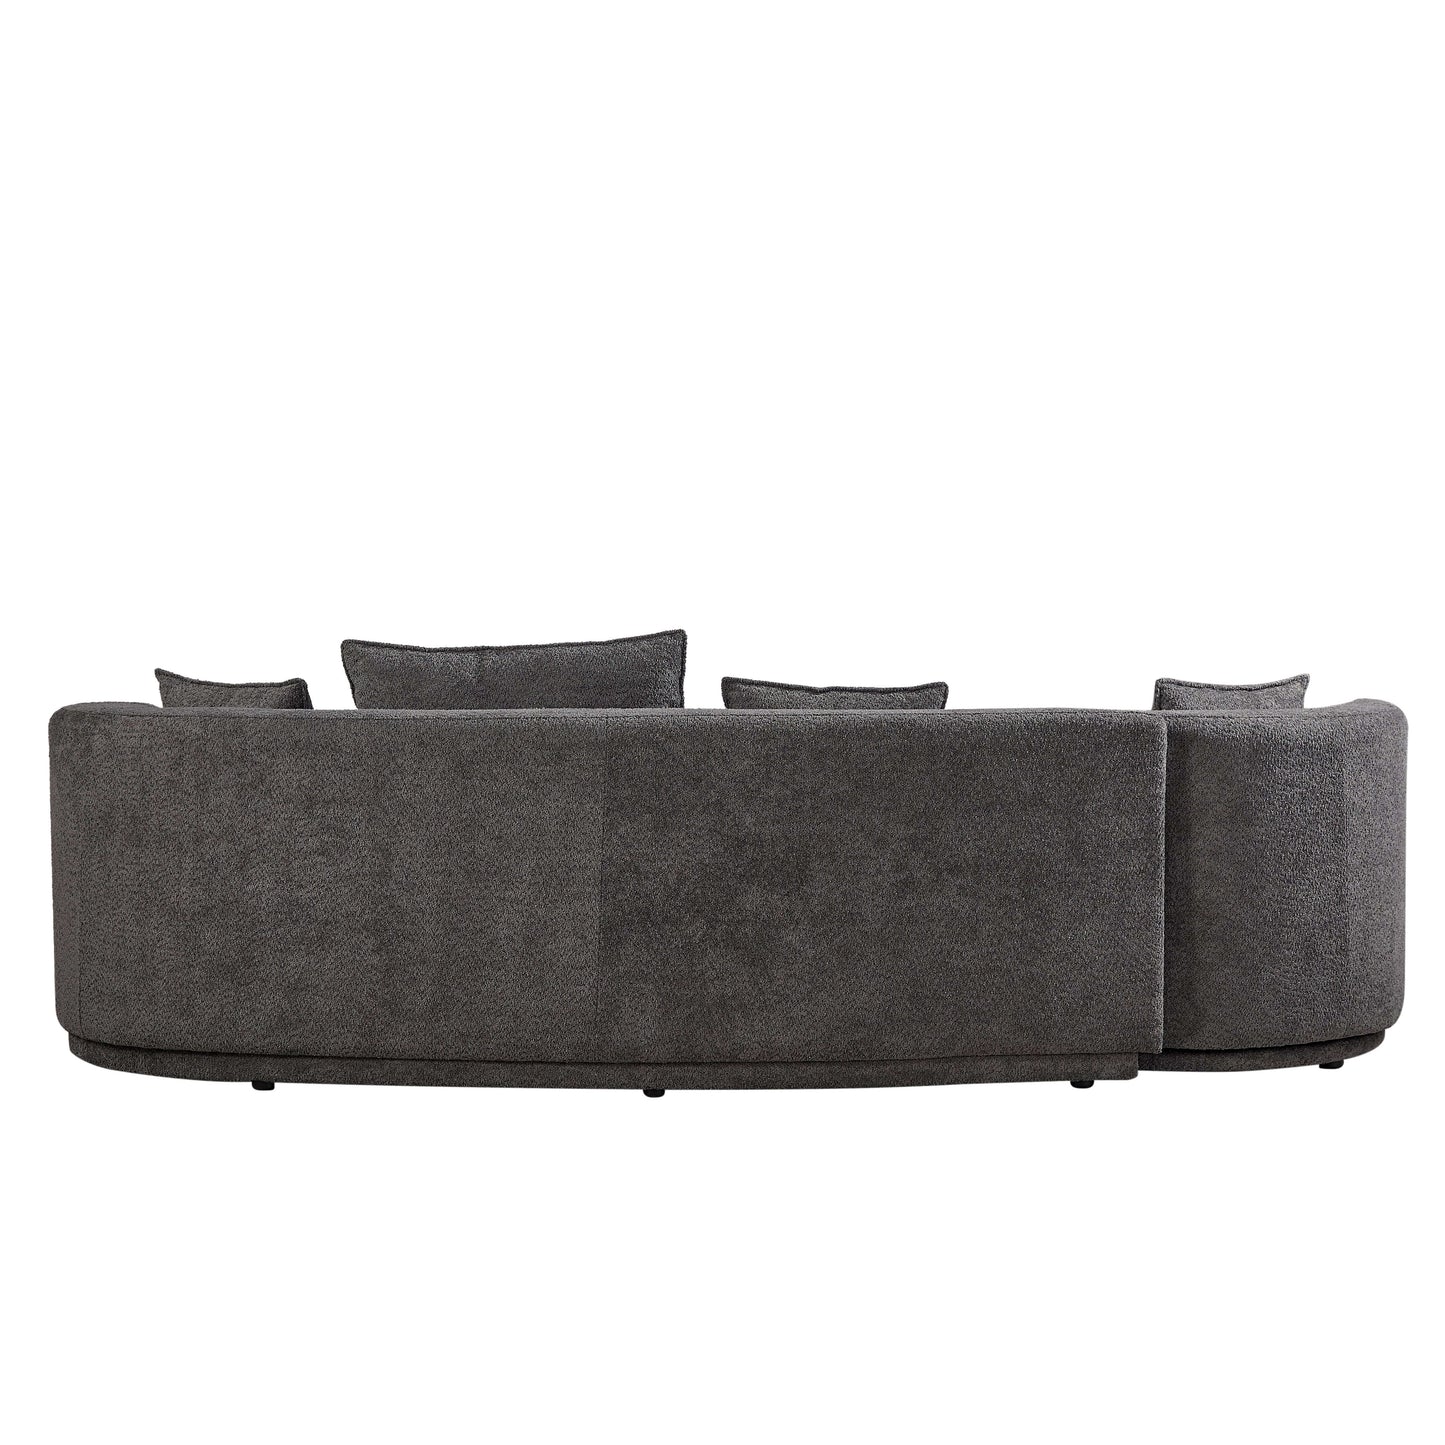 PUG258Y Sectional Sofa Couch with Luxury Teddy Fleece ,3 Seater , Armchair Swivel 360 Degree - Grey